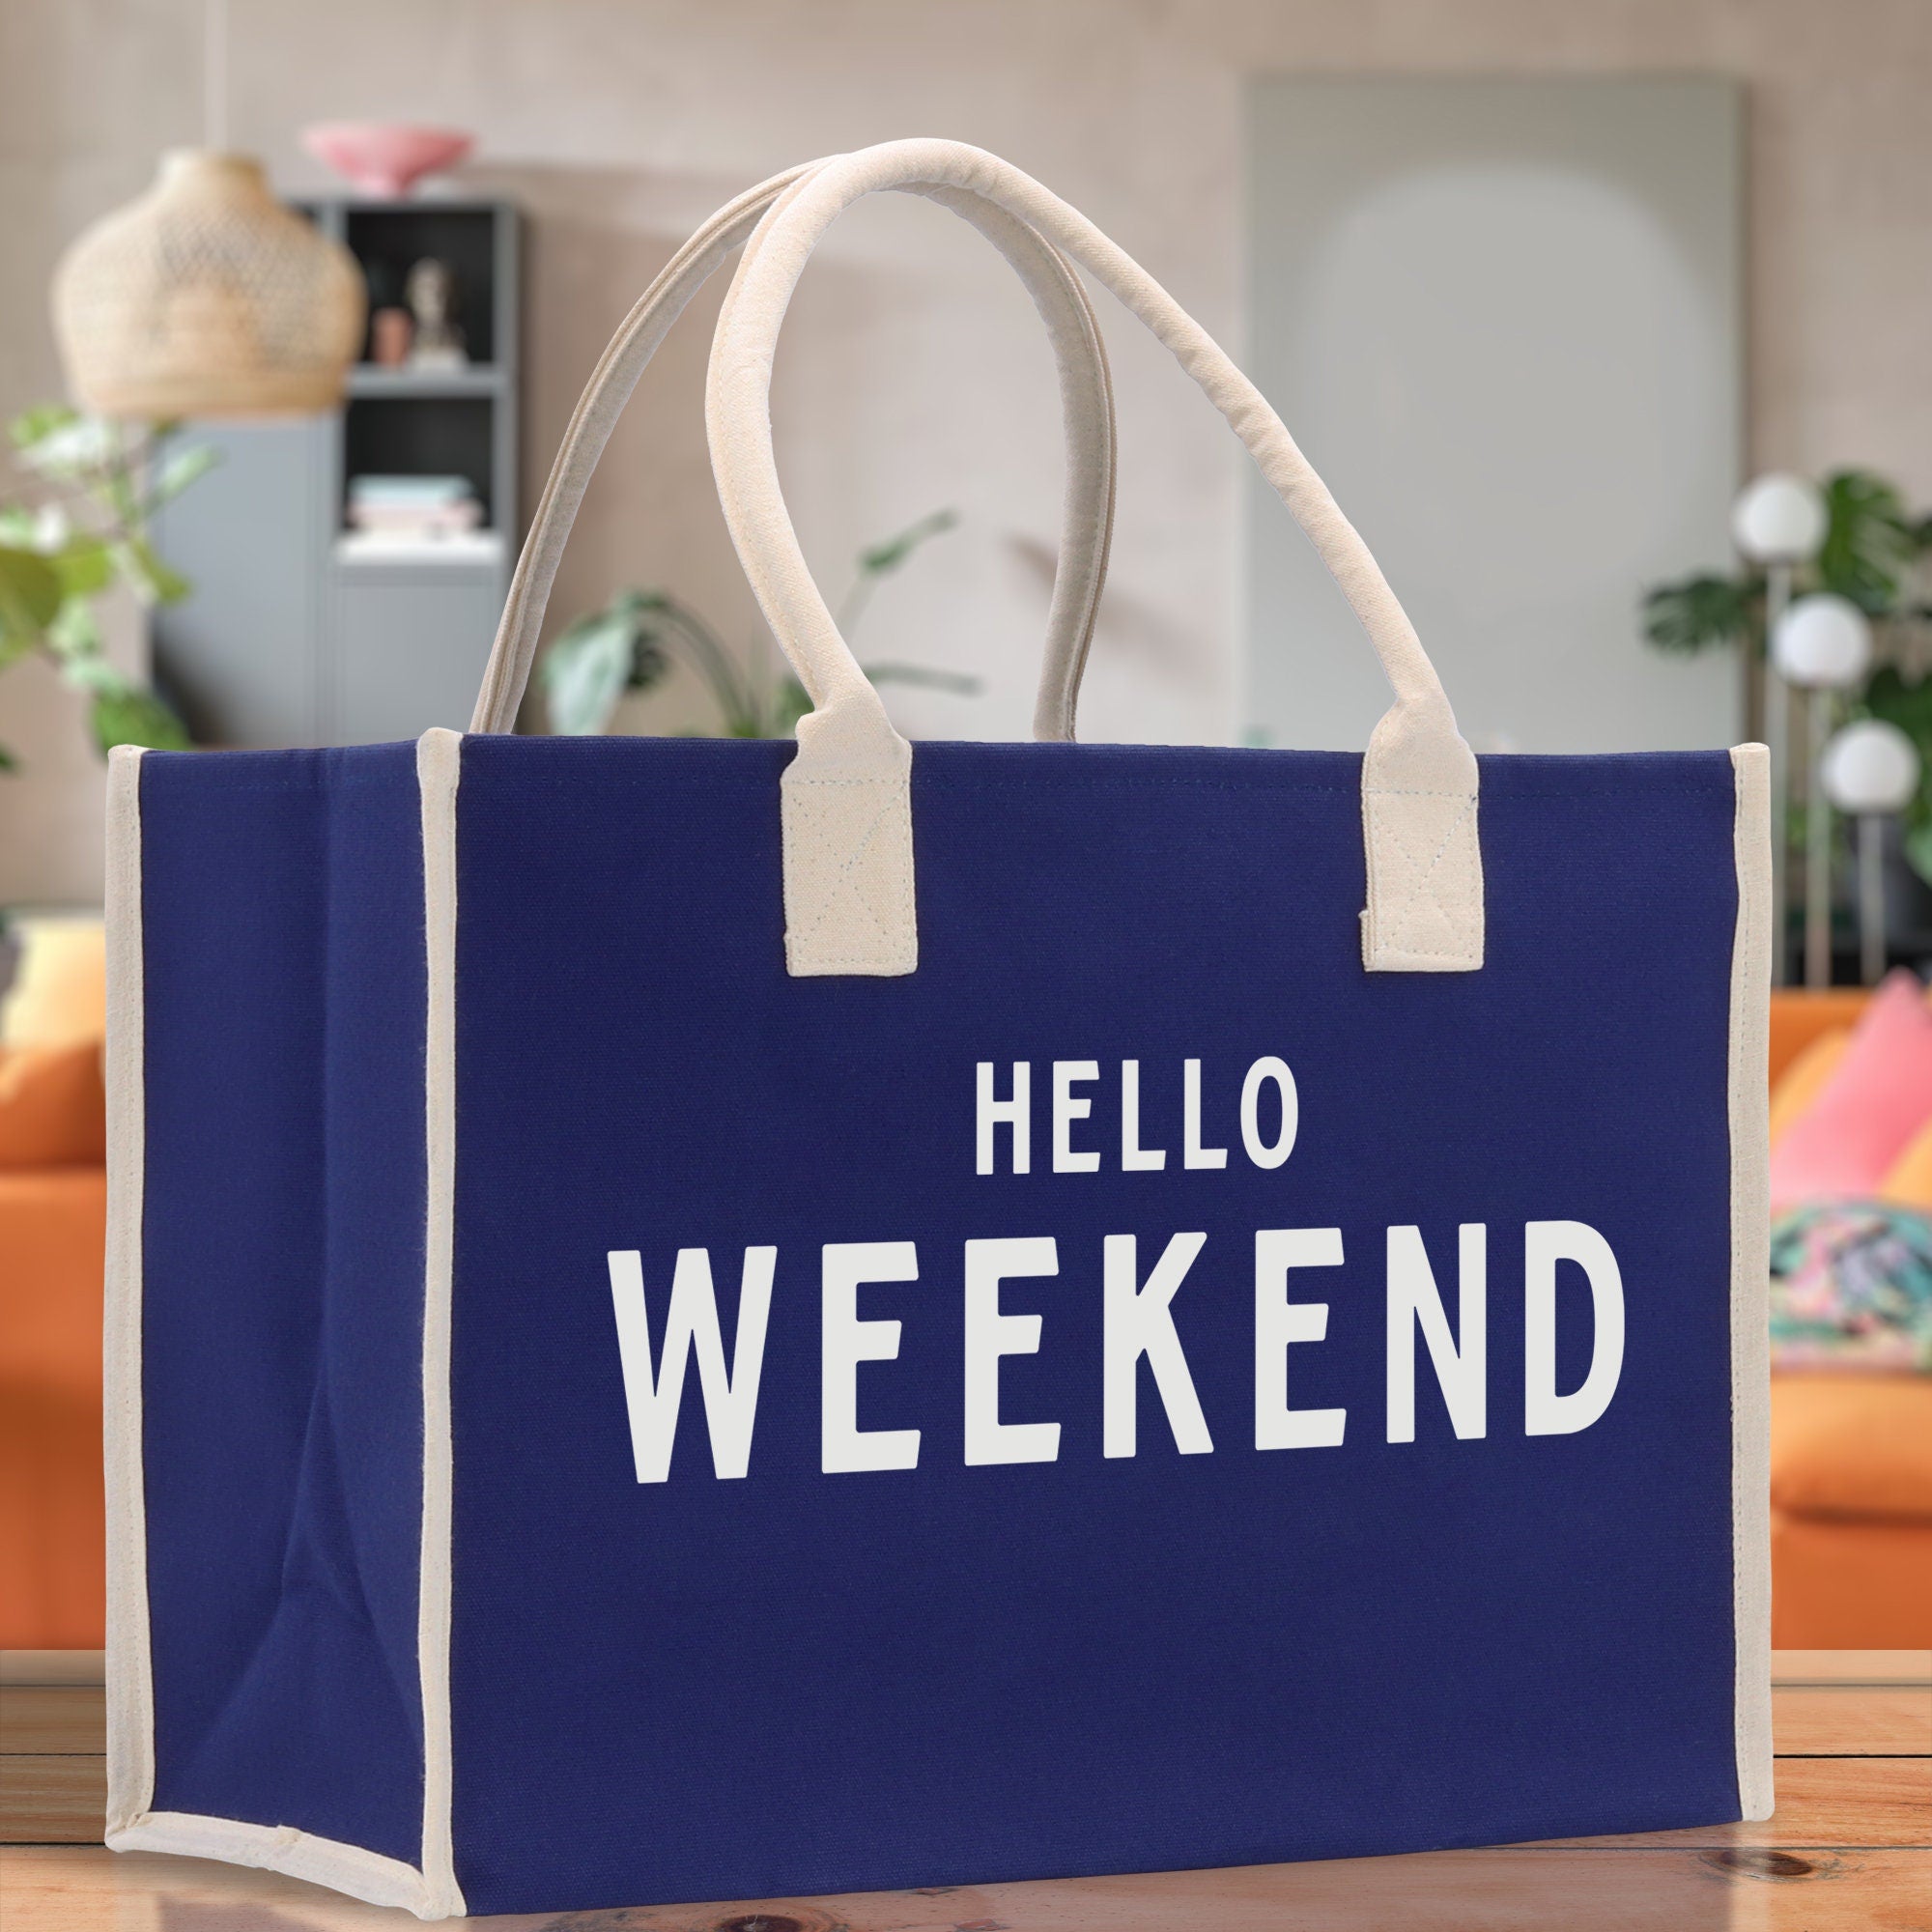 Hello Weekend Cotton Canvas Chic Beach Tote Bag Multipurpose Tote Weekender Tote Gift for Her Outdoor Tote Vacation Tote Large Beach Bag